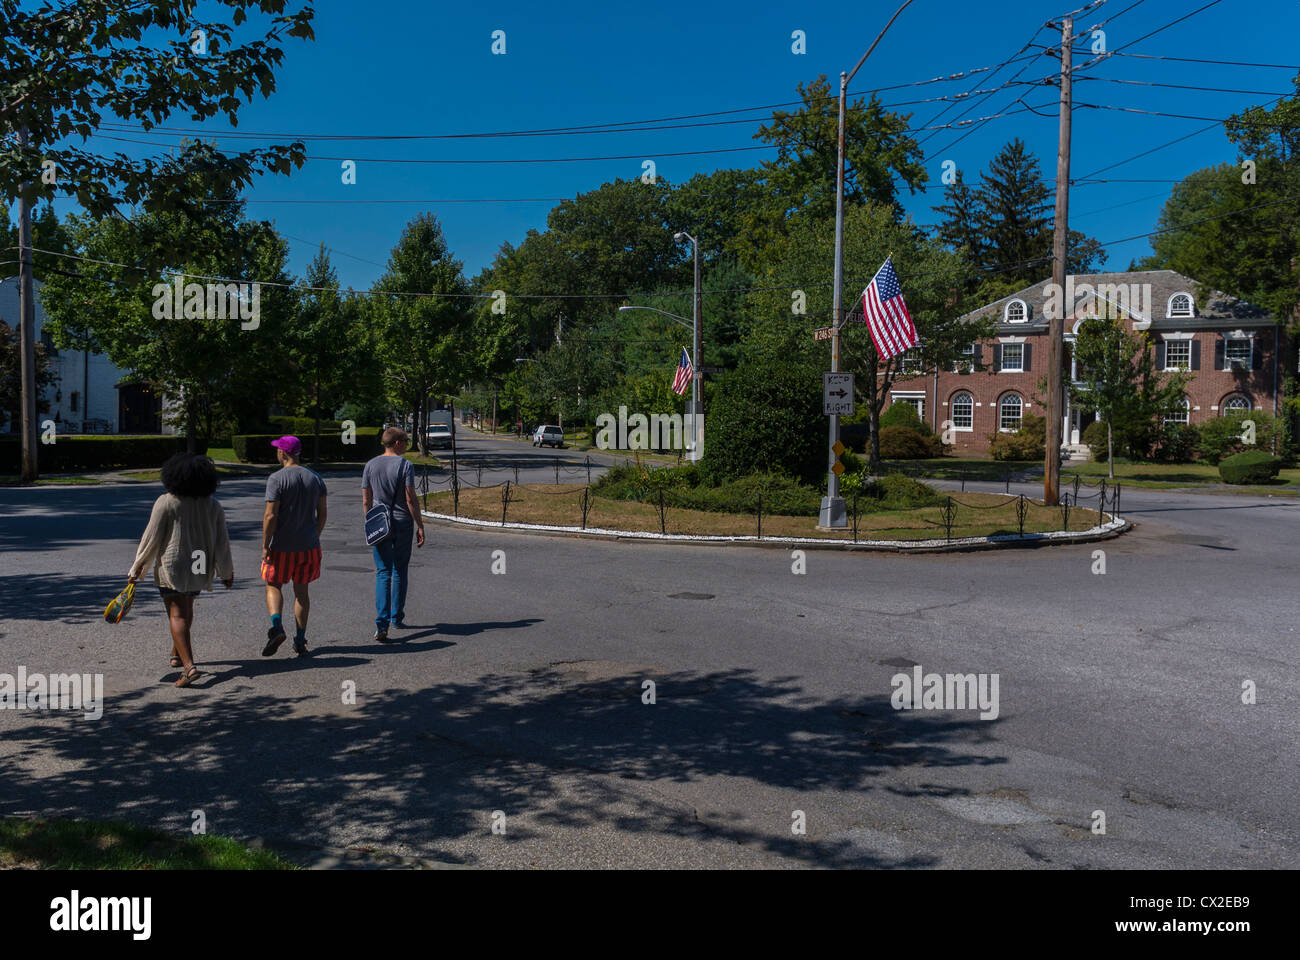 Bronx, New York, NY, USA, Tourists Visiting Fieldston Historic District, 'Wave Hill' Public Garden,Street Scene in Exclusive Private Neighborhood Stock Photo